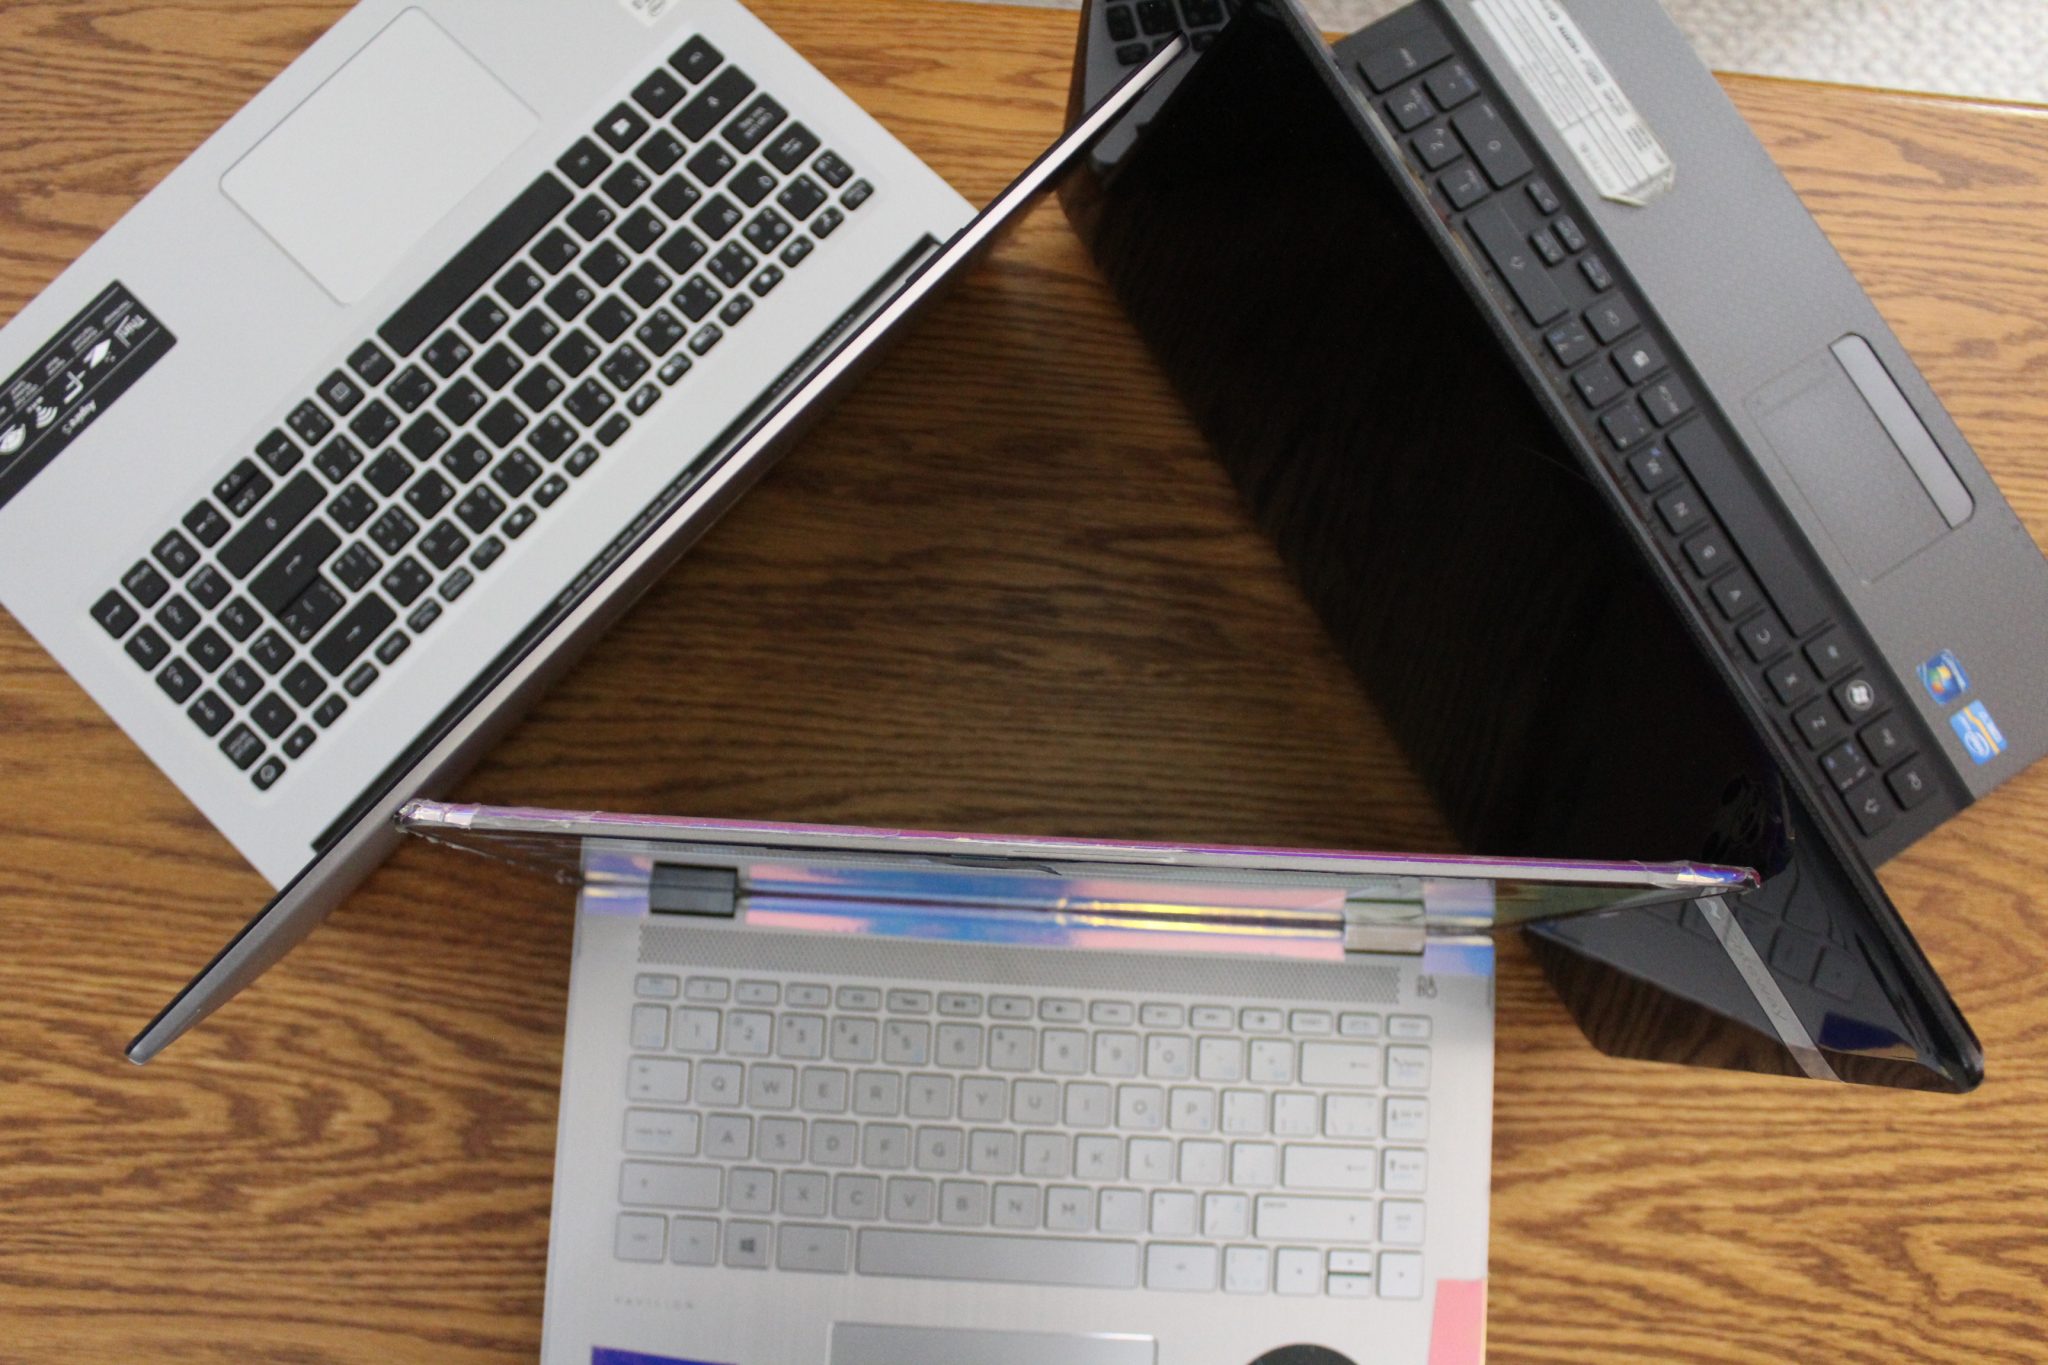 Three laptops organized in a triangle formation